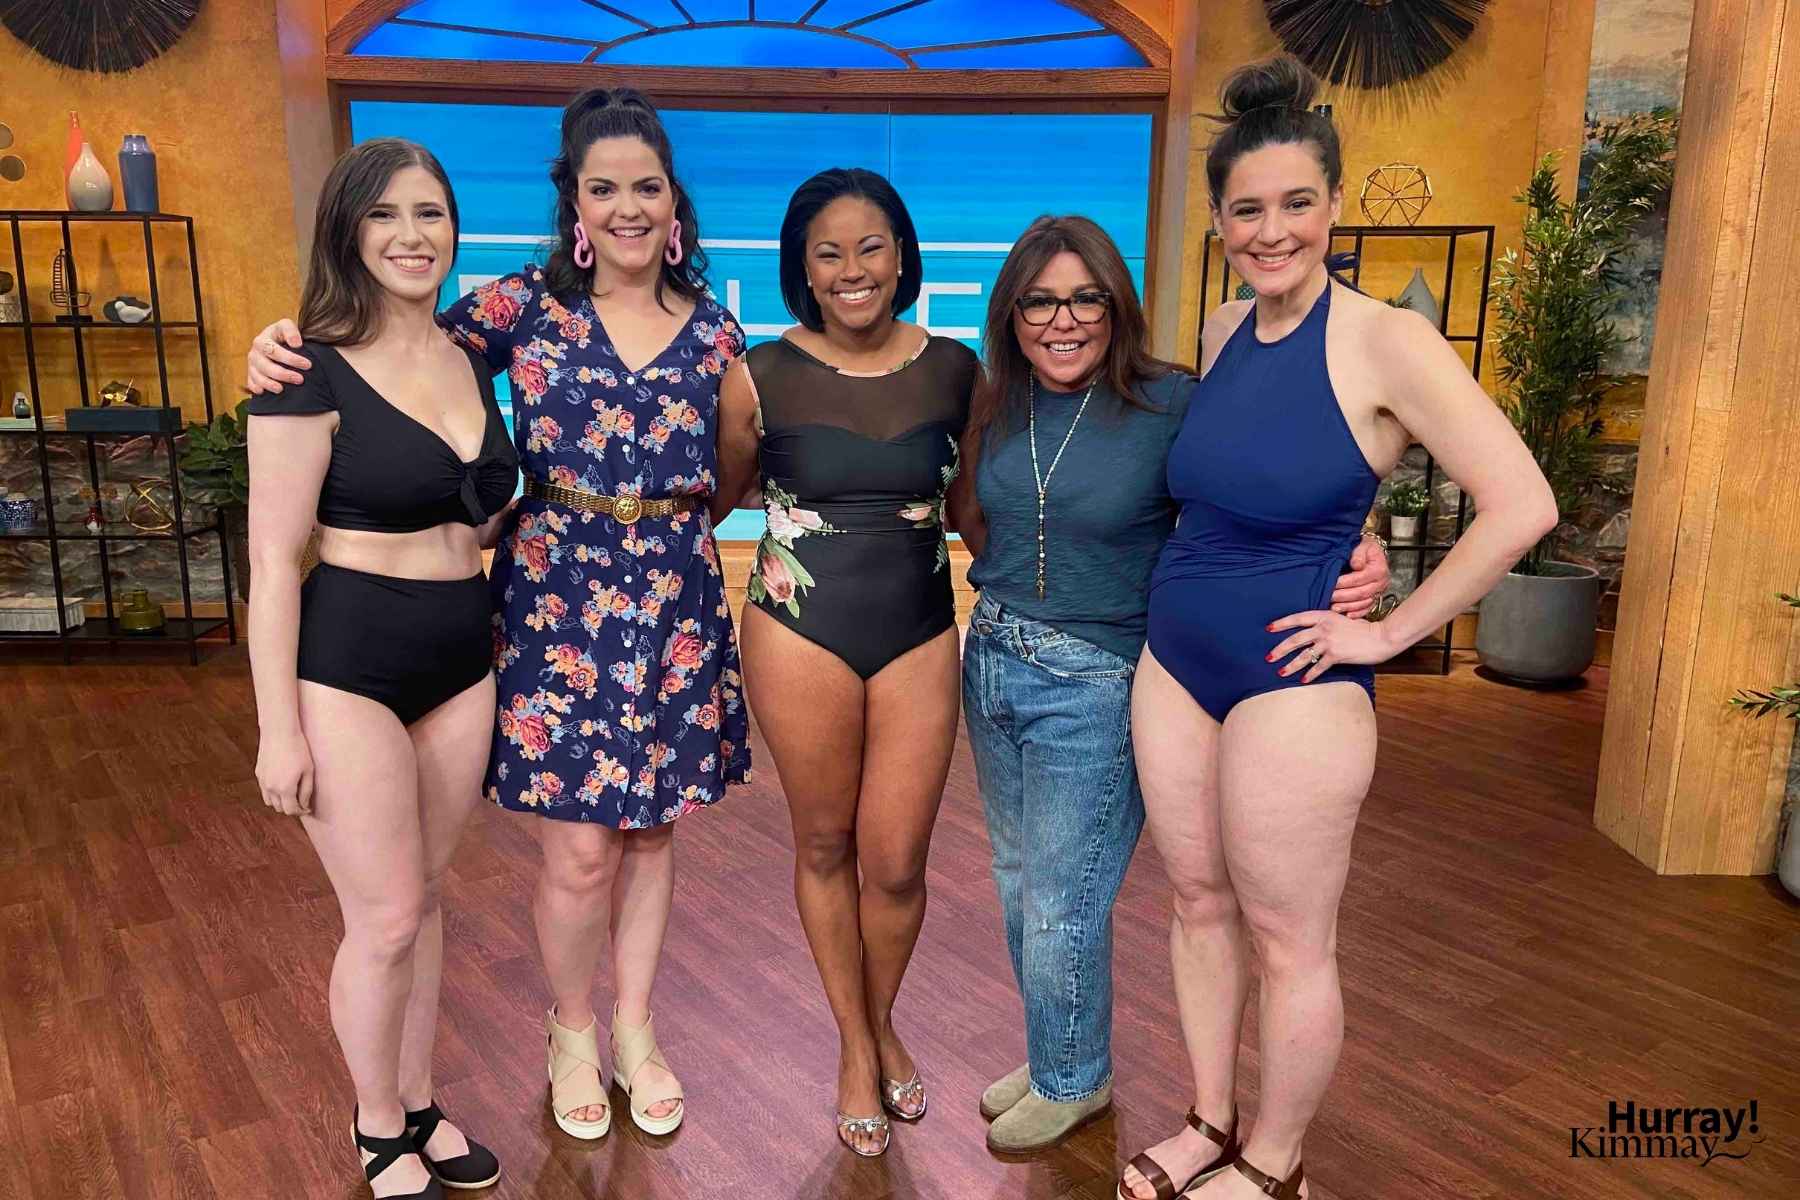 becca stauffer recommends sexy photos of rachael ray pic